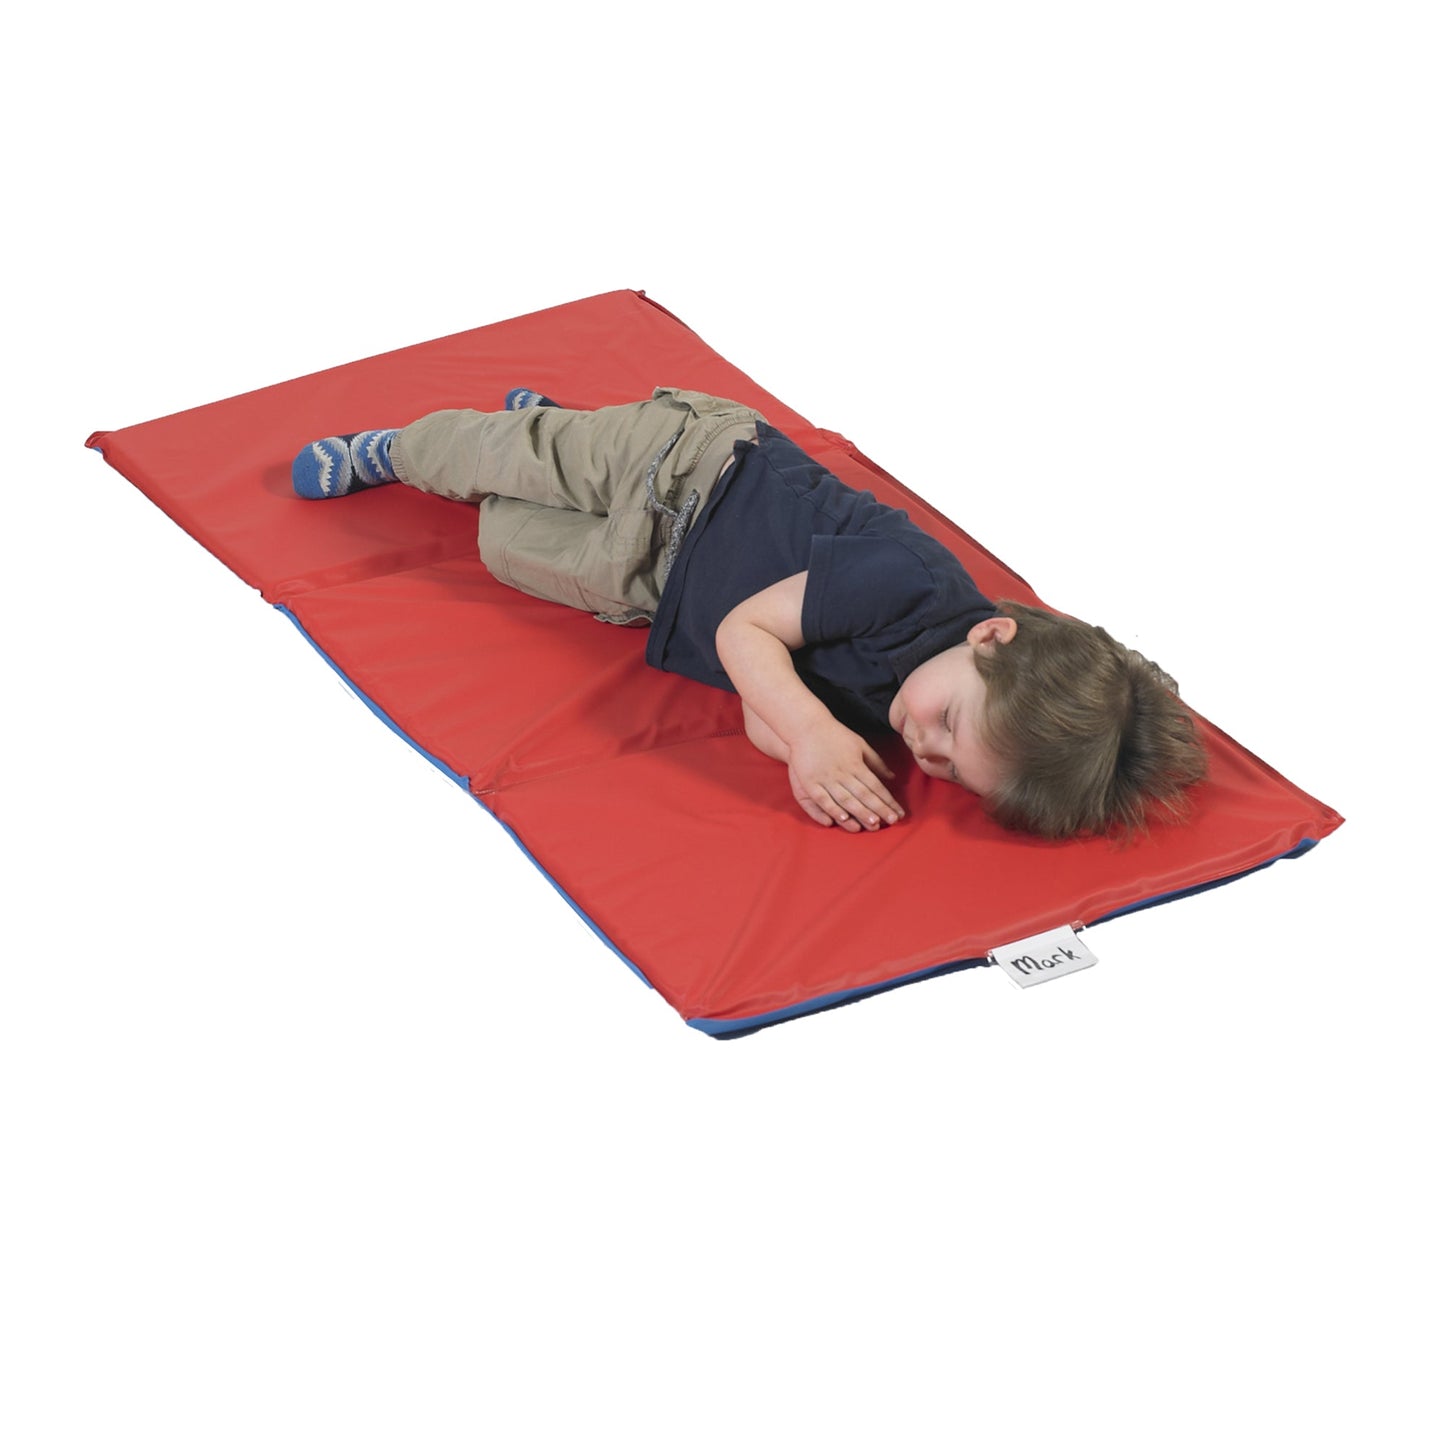 Children's Factory 1" Infection Control 3 Section Folding Rest Mat - Red/Blue (CF400-502RB) - SchoolOutlet